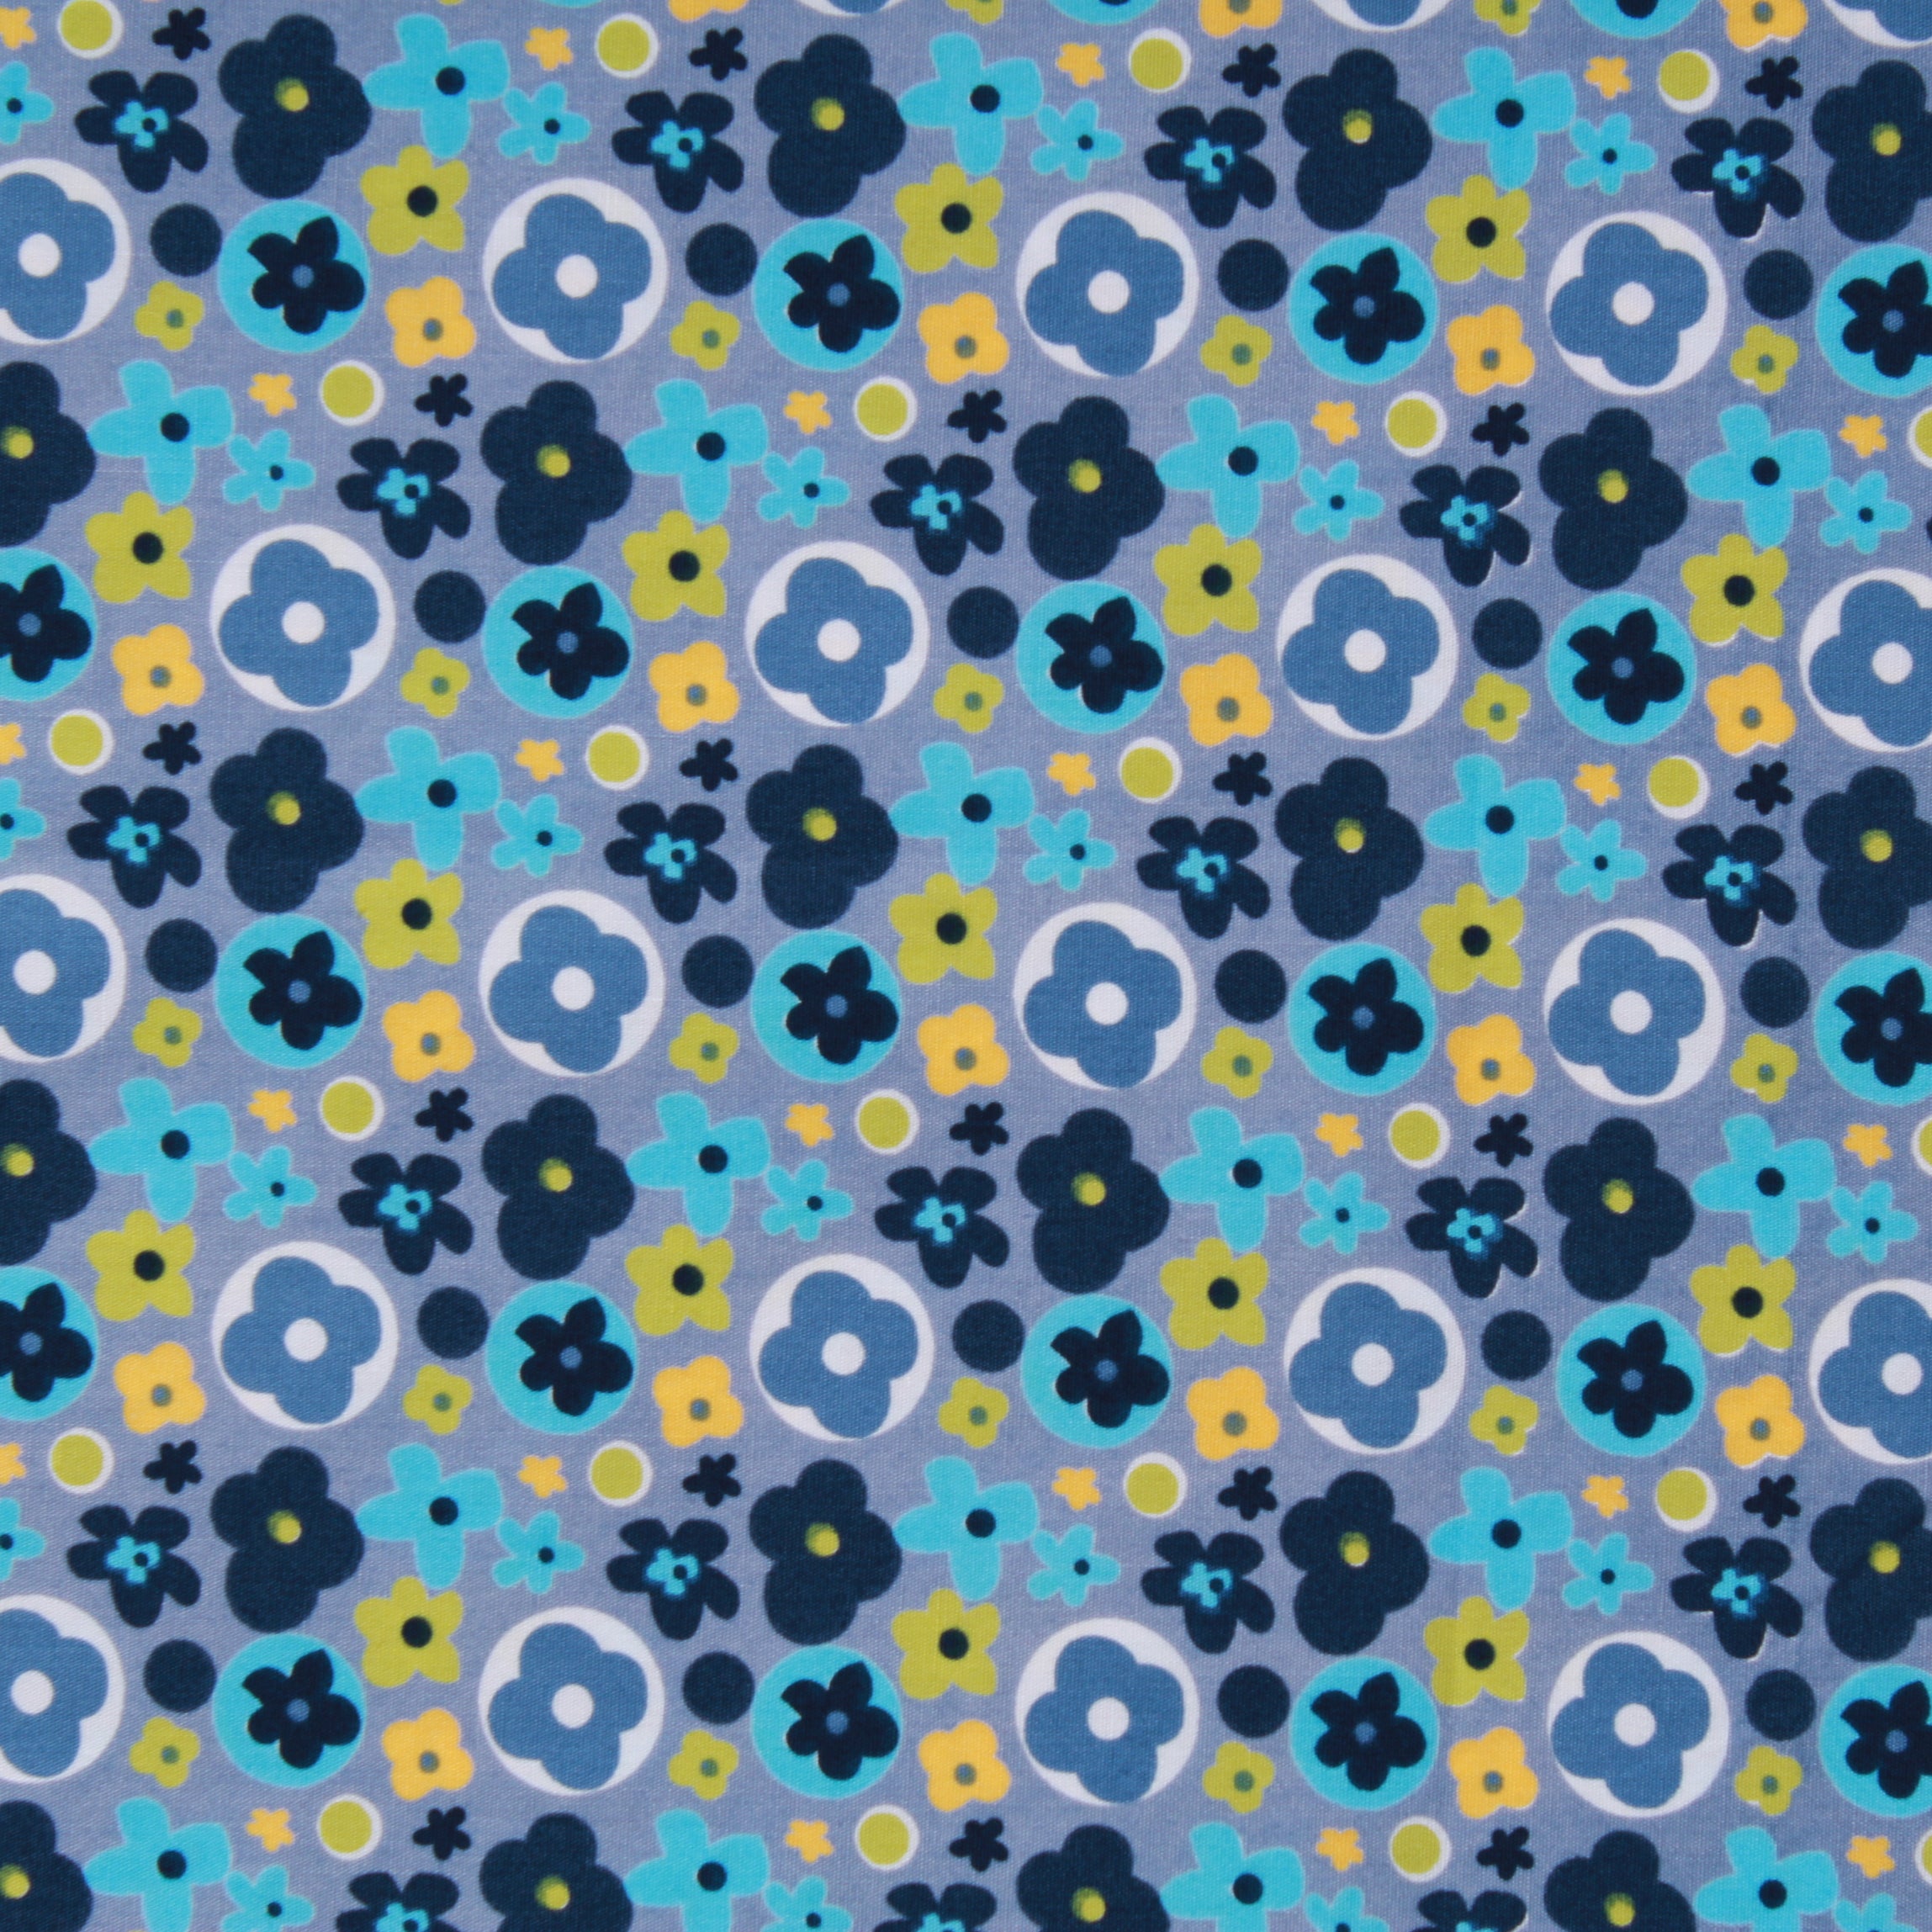 Floral Fabric - White Daisy Ditsy Flower on Teal Blue - 100% Cotton Po –  House of Haberdashery